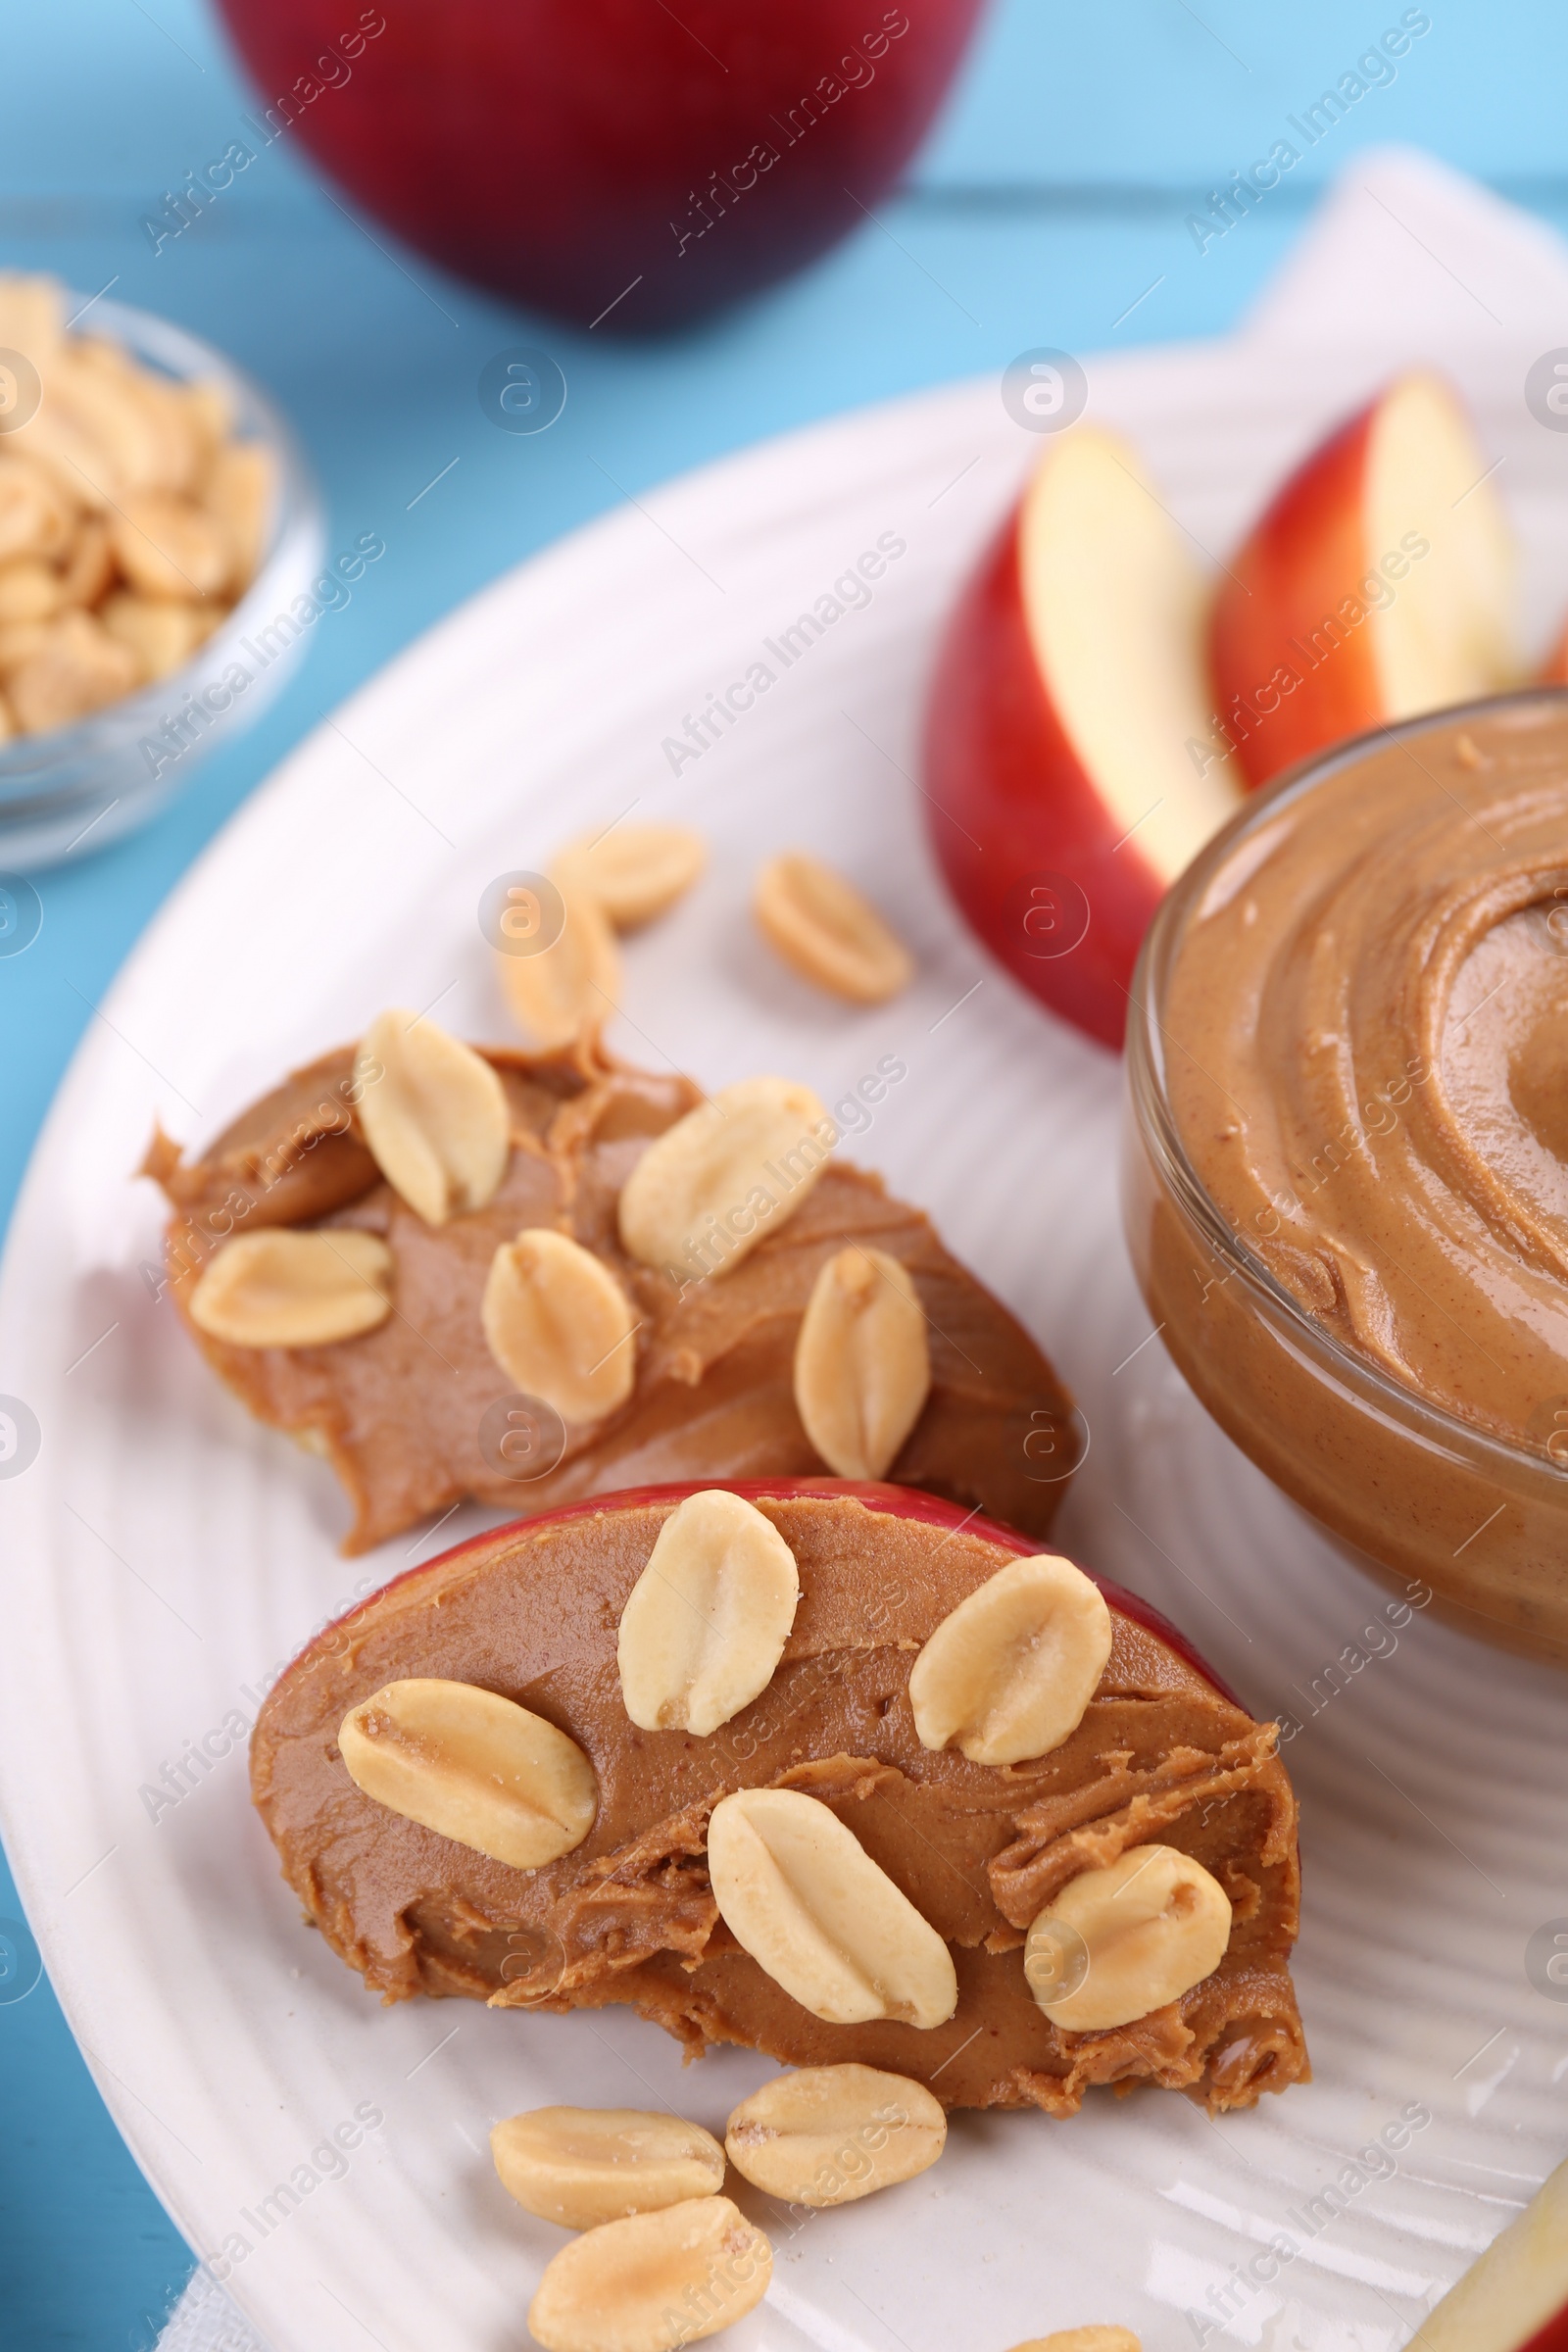 Photo of Slices of fresh apple with peanut butter and nuts on table, closeup